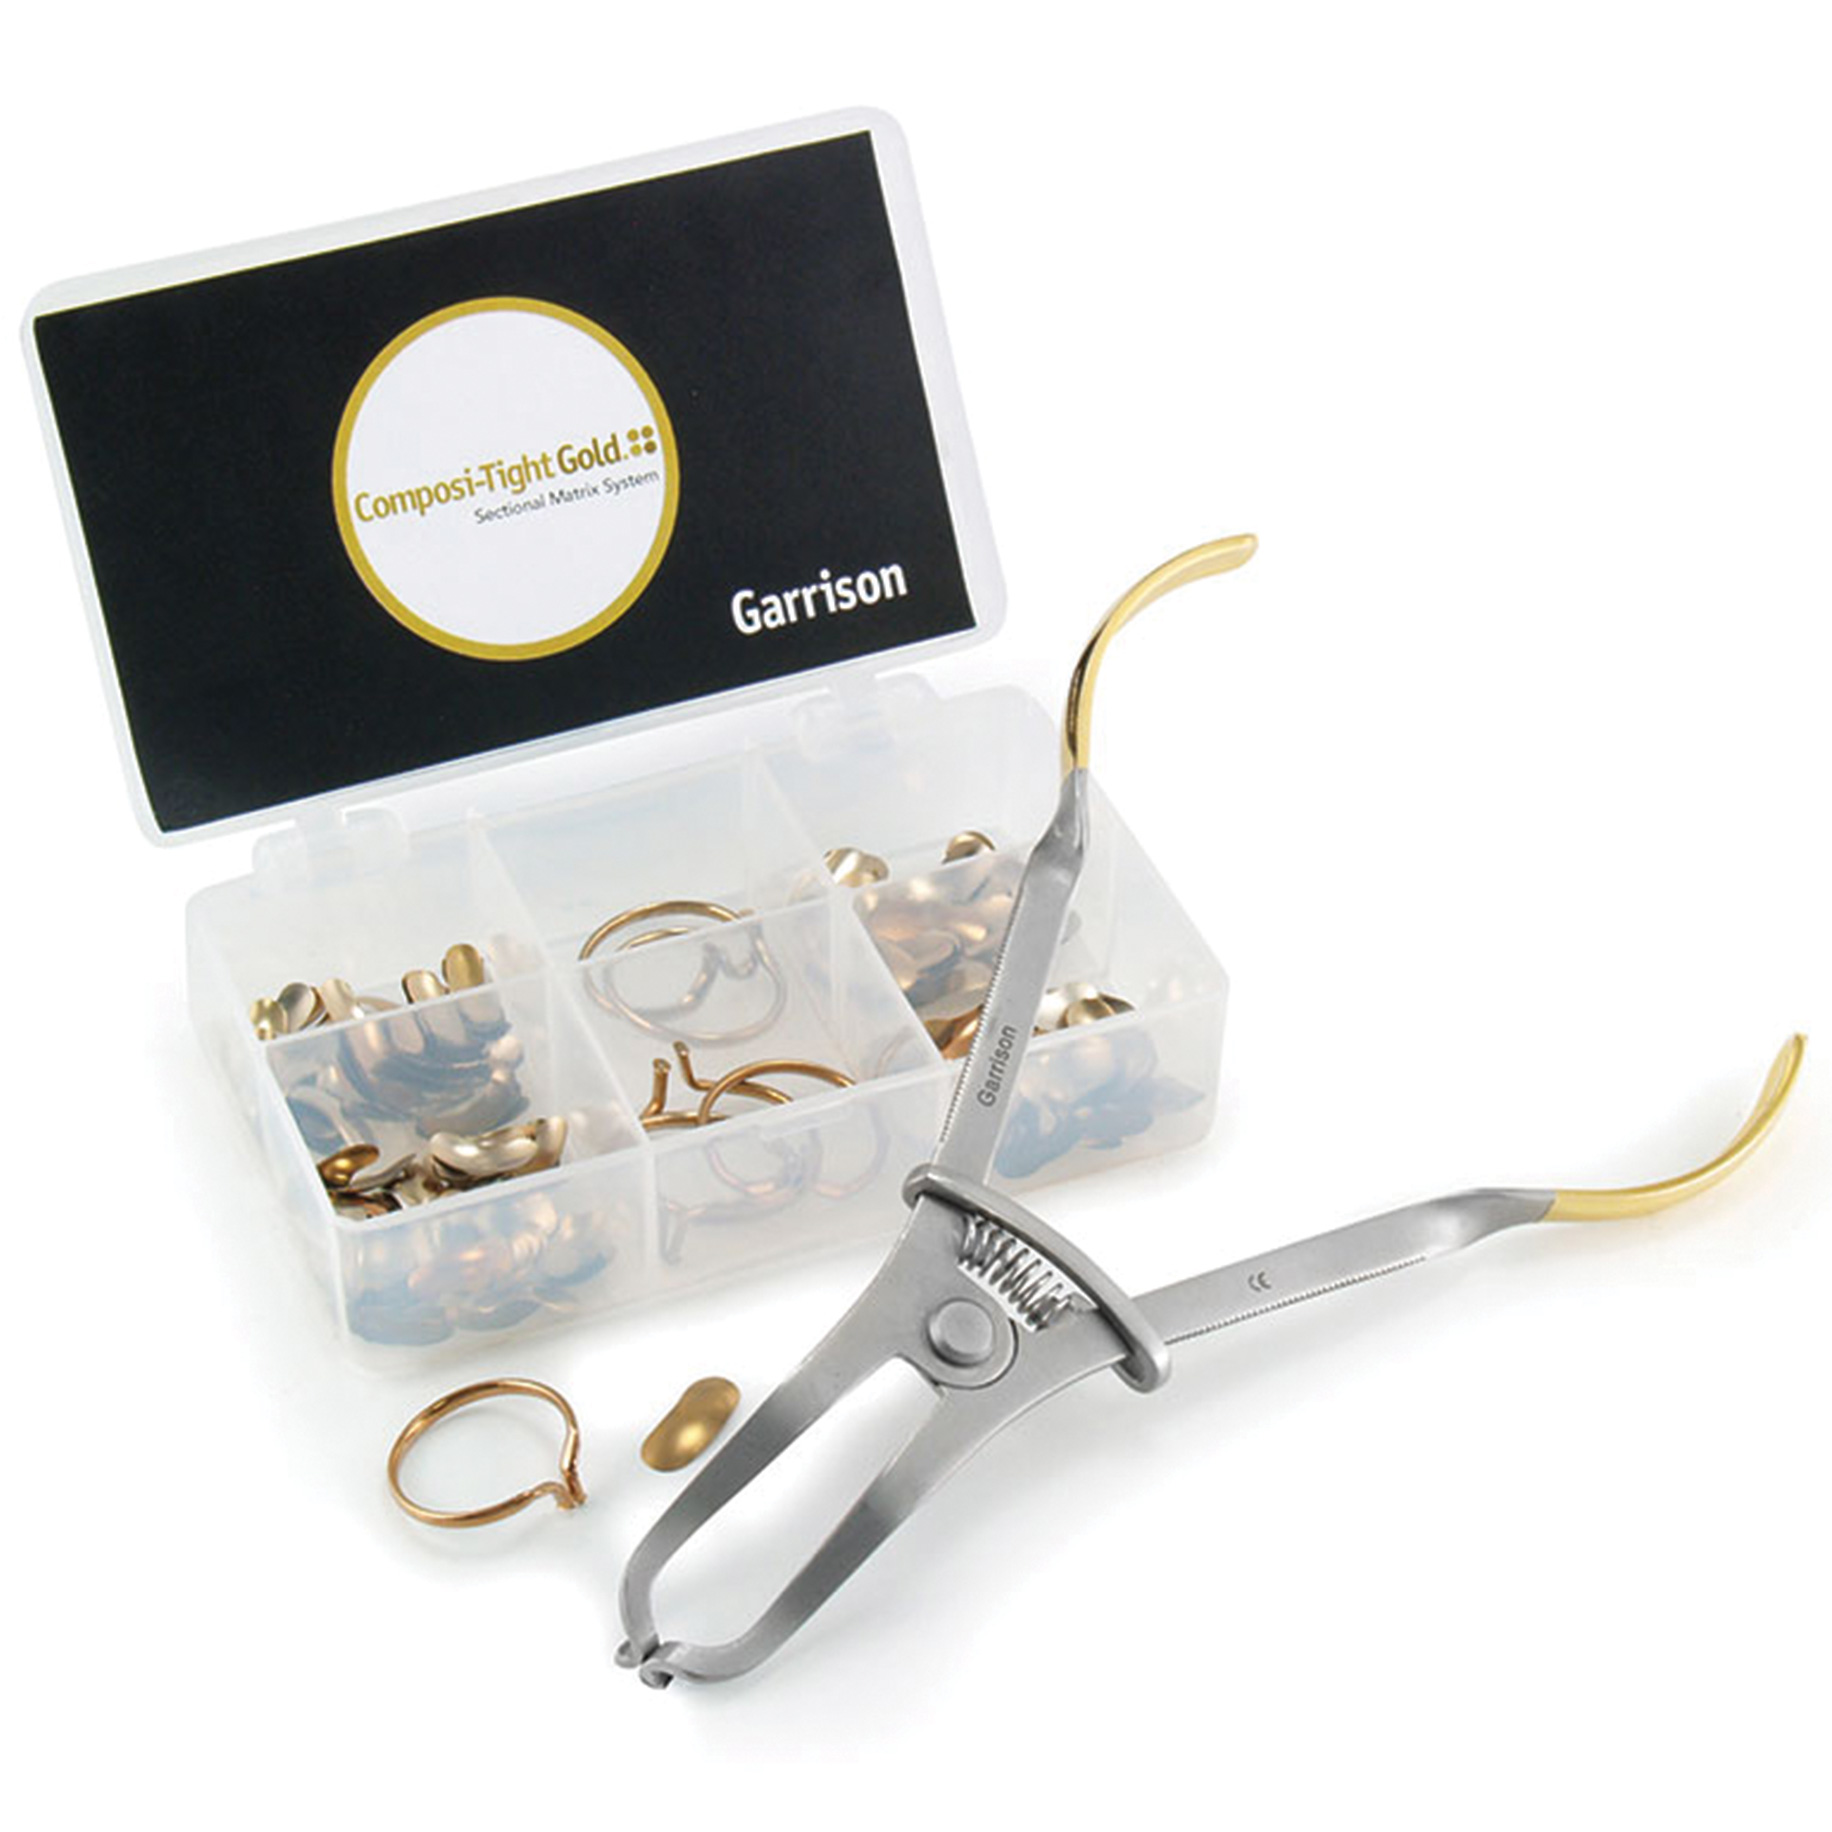 Composi-Tight Gold System Kit complete with Forceps 